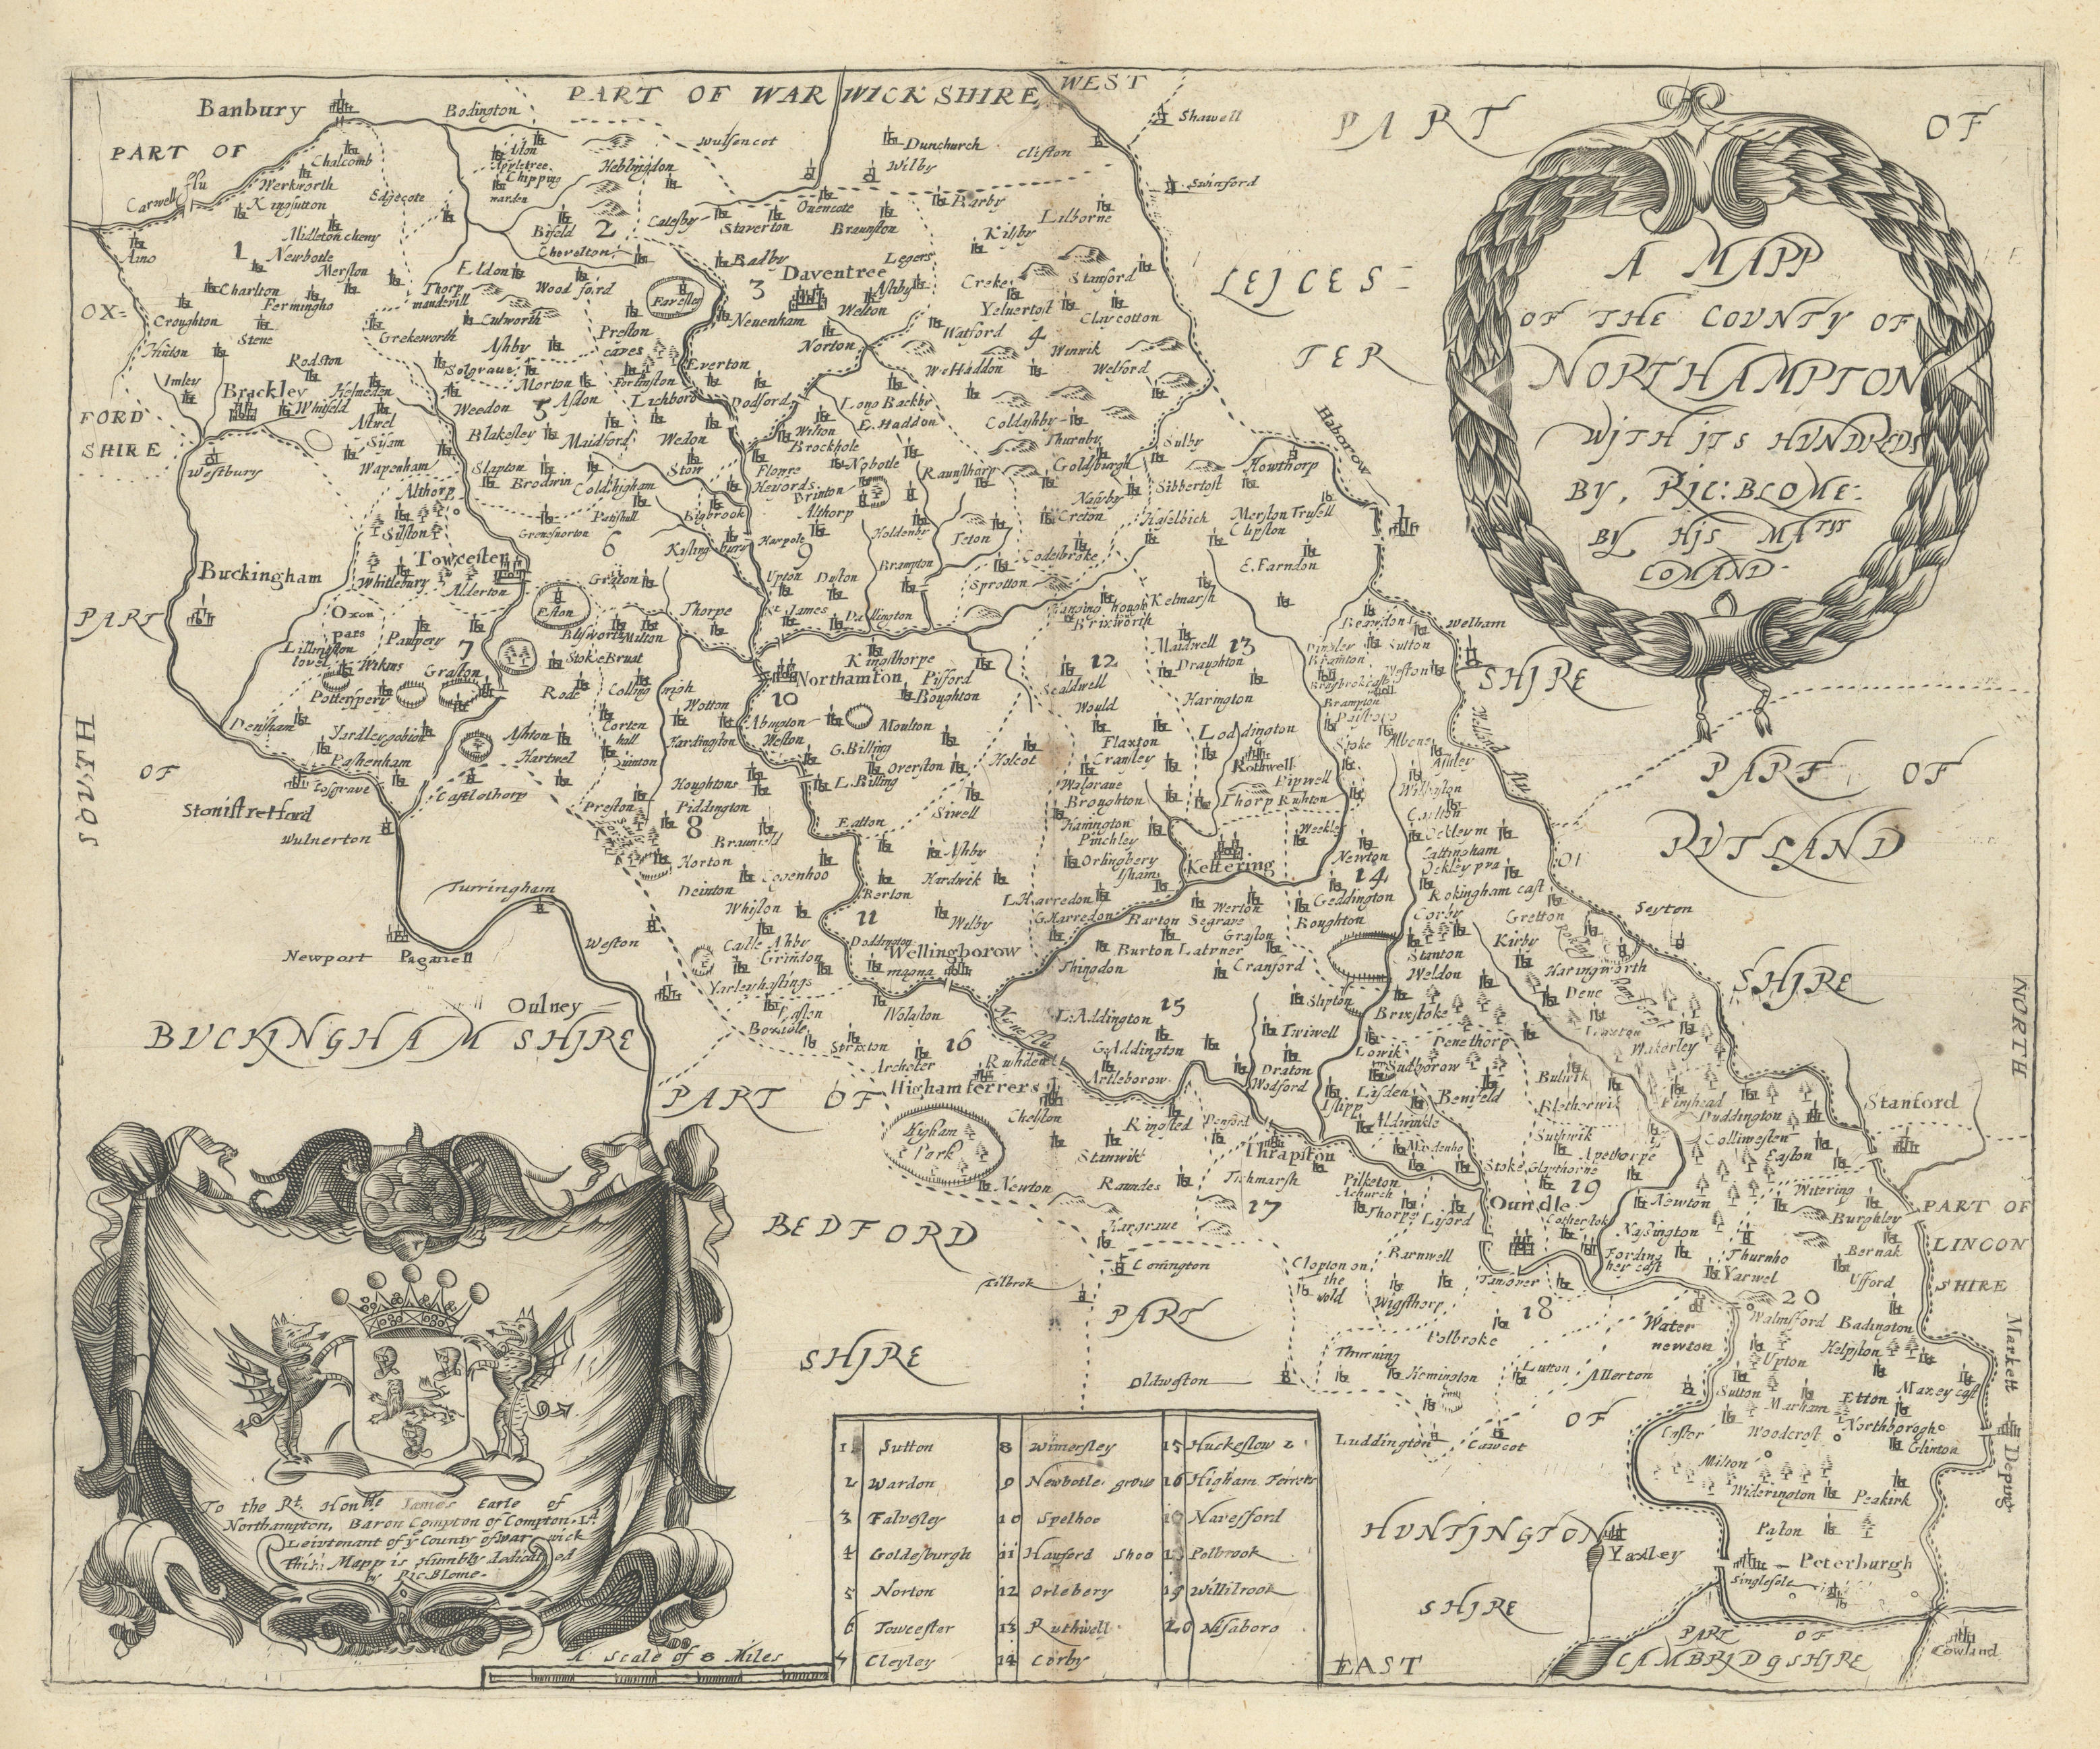 Associate Product A Mapp of the County of Northampton with its Hundreds by Richard Blome 1673